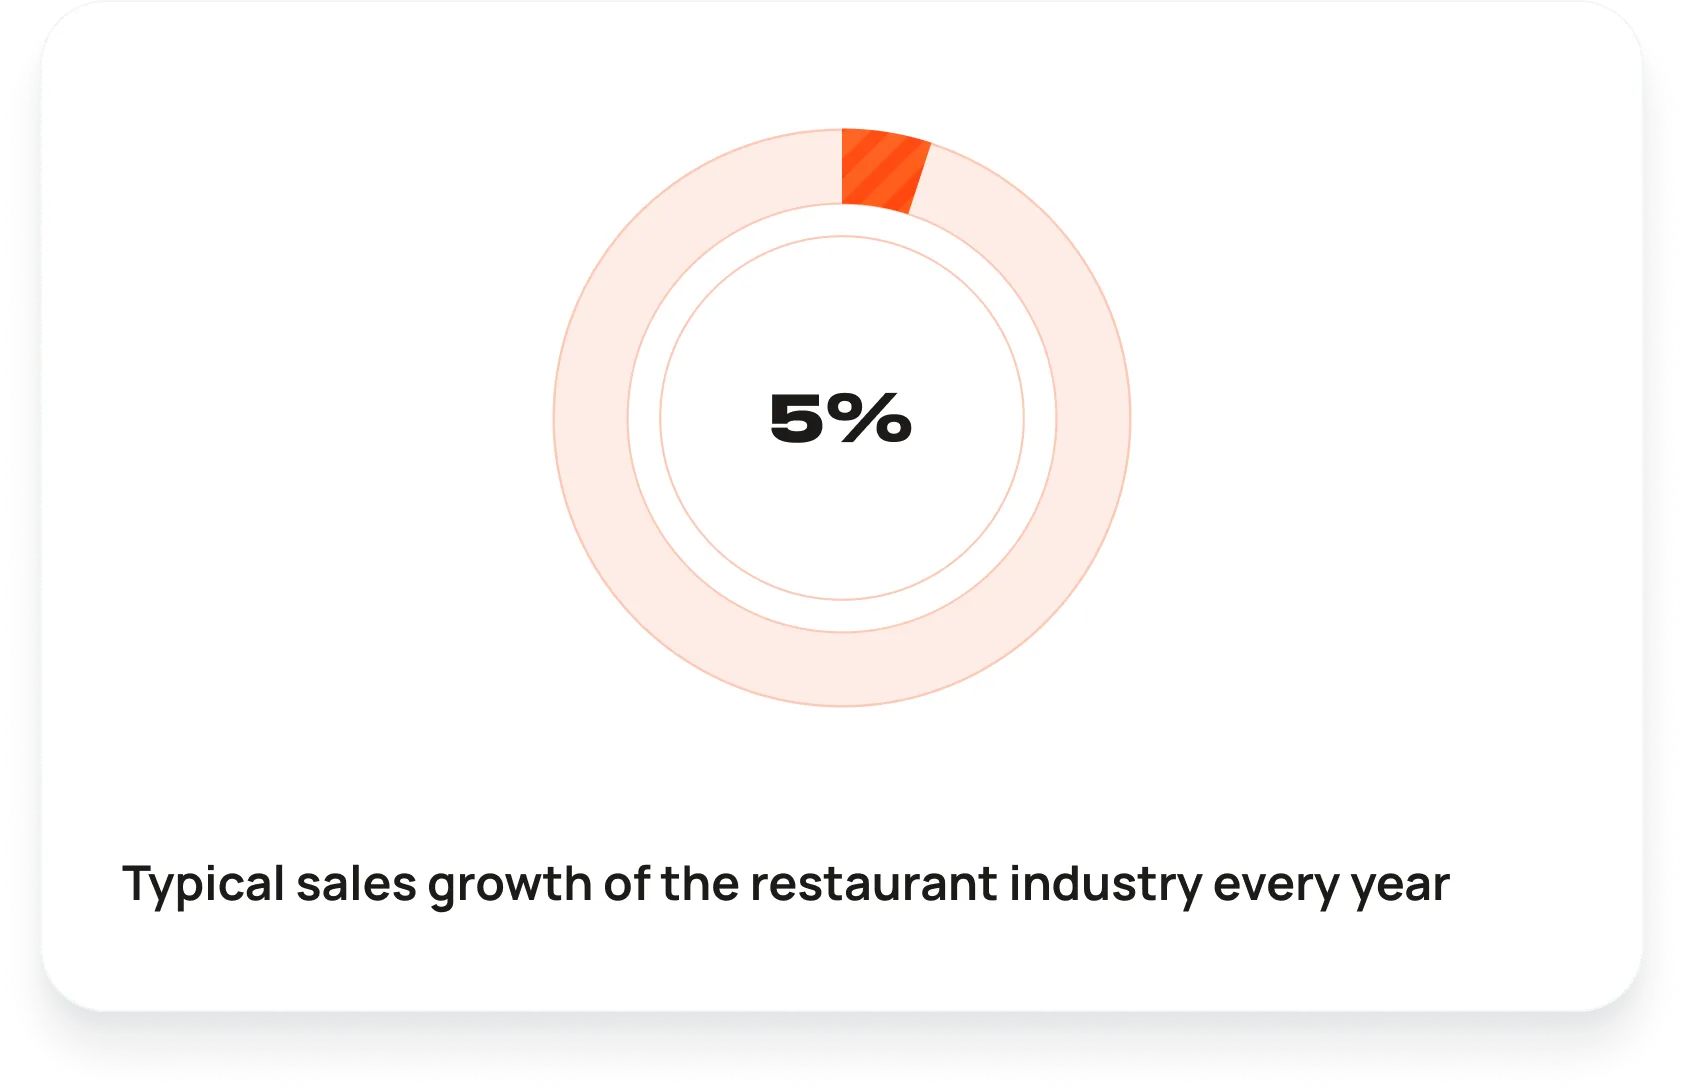 Typical sales growth of the restaurant industry every year - 5%